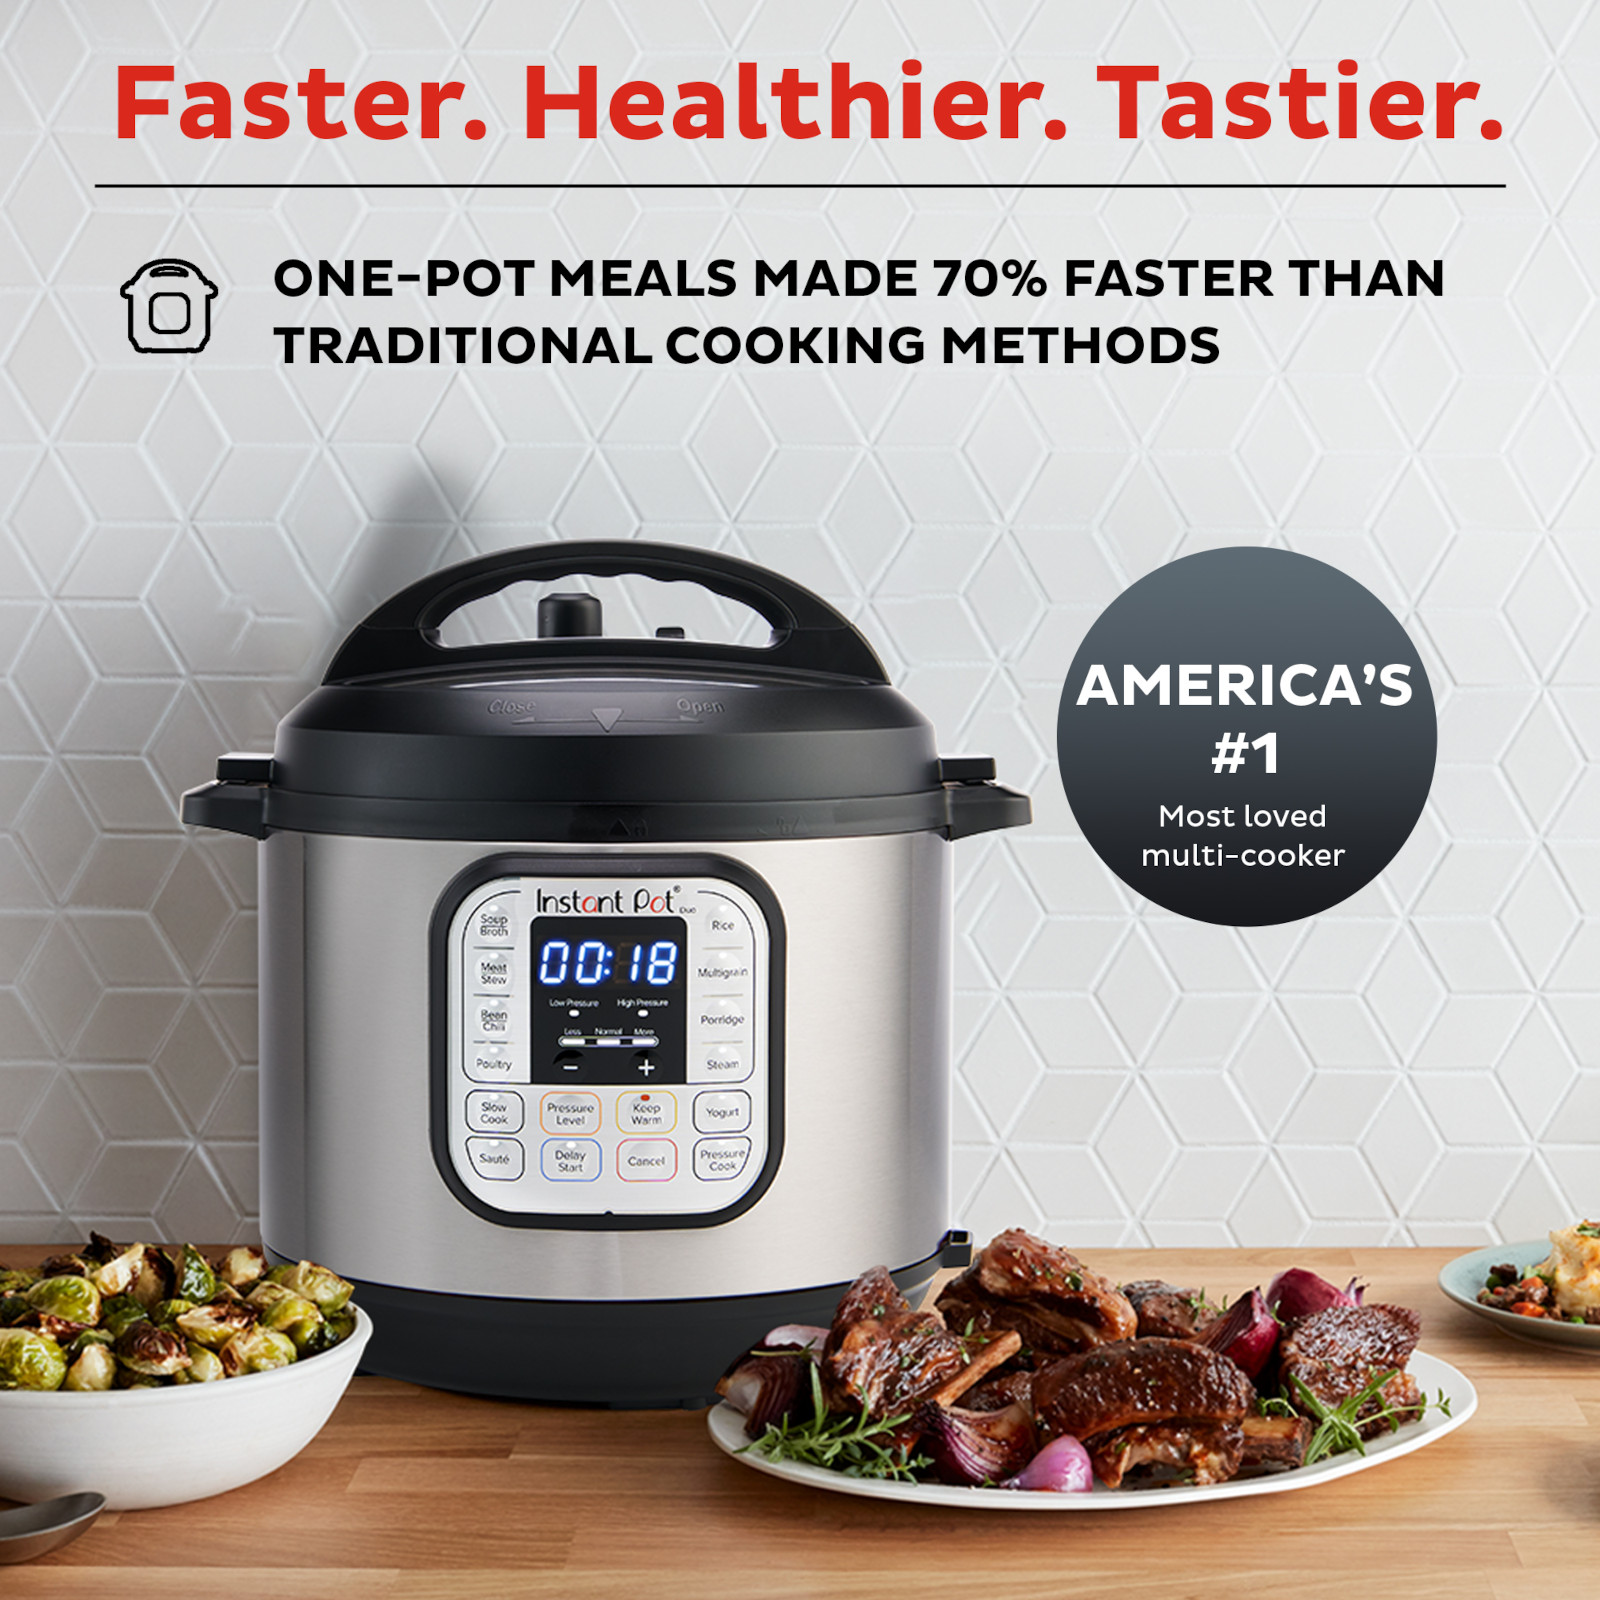 Instant Pot Duo 6 Qt Electric Pressure Cooker 7-in-1 with Easy-Release Steam Switch, Slow Cooker, Rice Cooker, Steamer and More - image 3 of 11